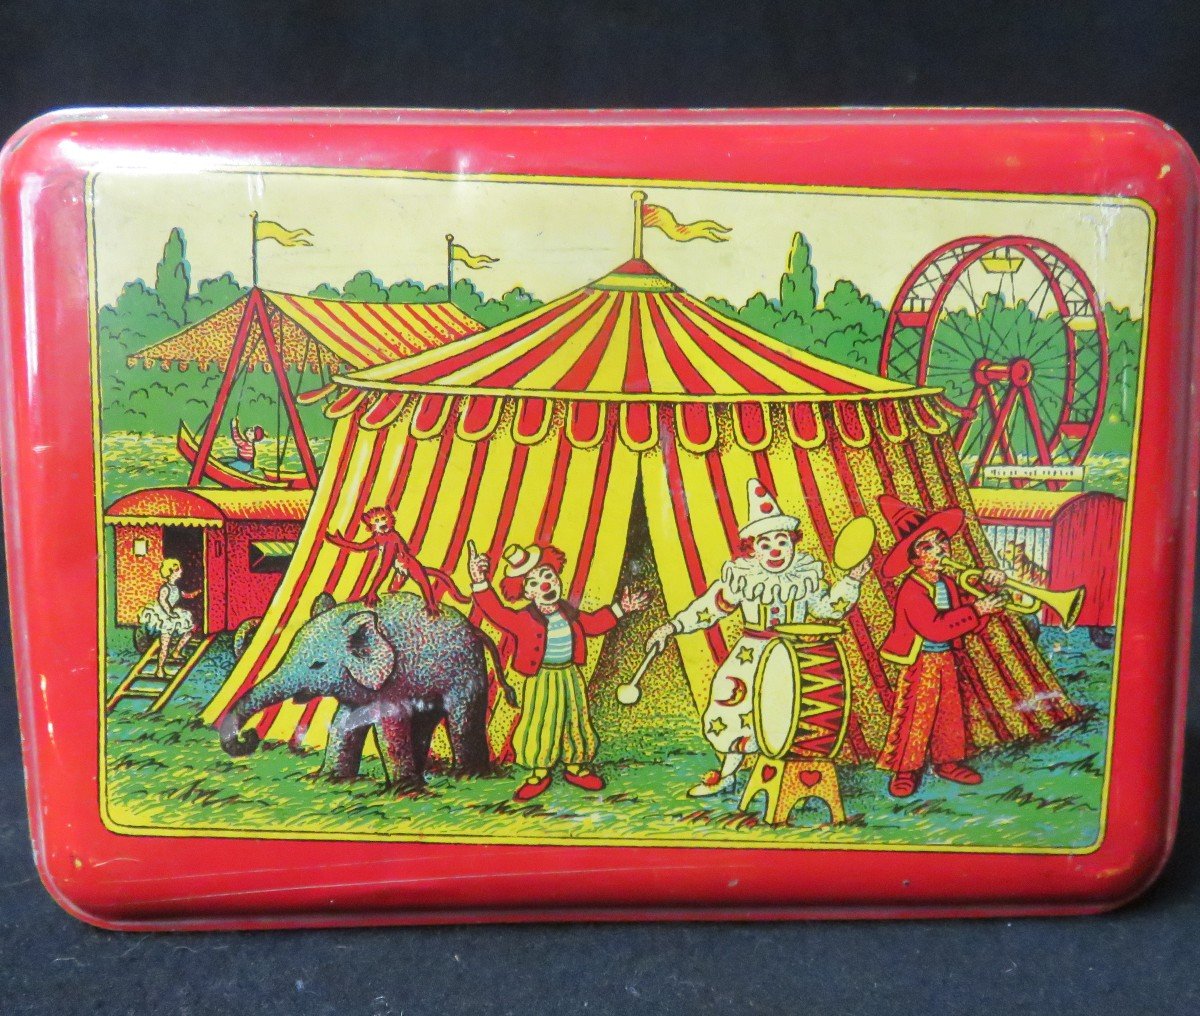 The Boxed Circus